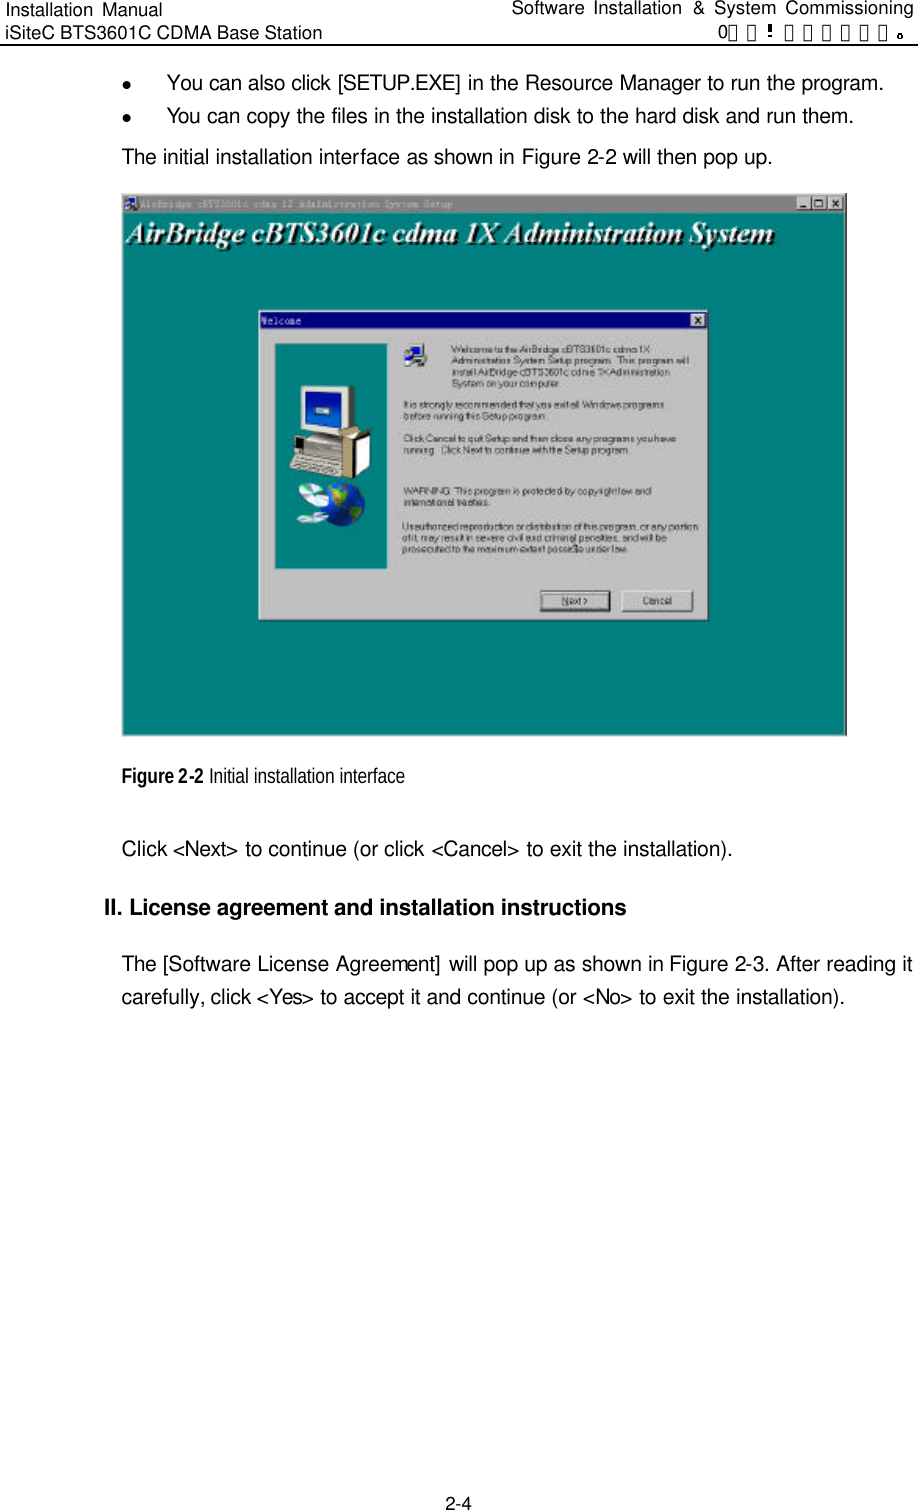 Installation Manual   iSiteC BTS3601C CDMA Base Station Software Installation &amp; System Commissioning 0错误 表格结果无效  2-4 l You can also click [SETUP.EXE] in the Resource Manager to run the program.   l You can copy the files in the installation disk to the hard disk and run them.   The initial installation interface as shown in Figure 2-2 will then pop up.    Figure 2-2 Initial installation interface Click &lt;Next&gt; to continue (or click &lt;Cancel&gt; to exit the installation).   II. License agreement and installation instructions The [Software License Agreement] will pop up as shown in Figure 2-3. After reading it carefully, click &lt;Yes&gt; to accept it and continue (or &lt;No&gt; to exit the installation).   